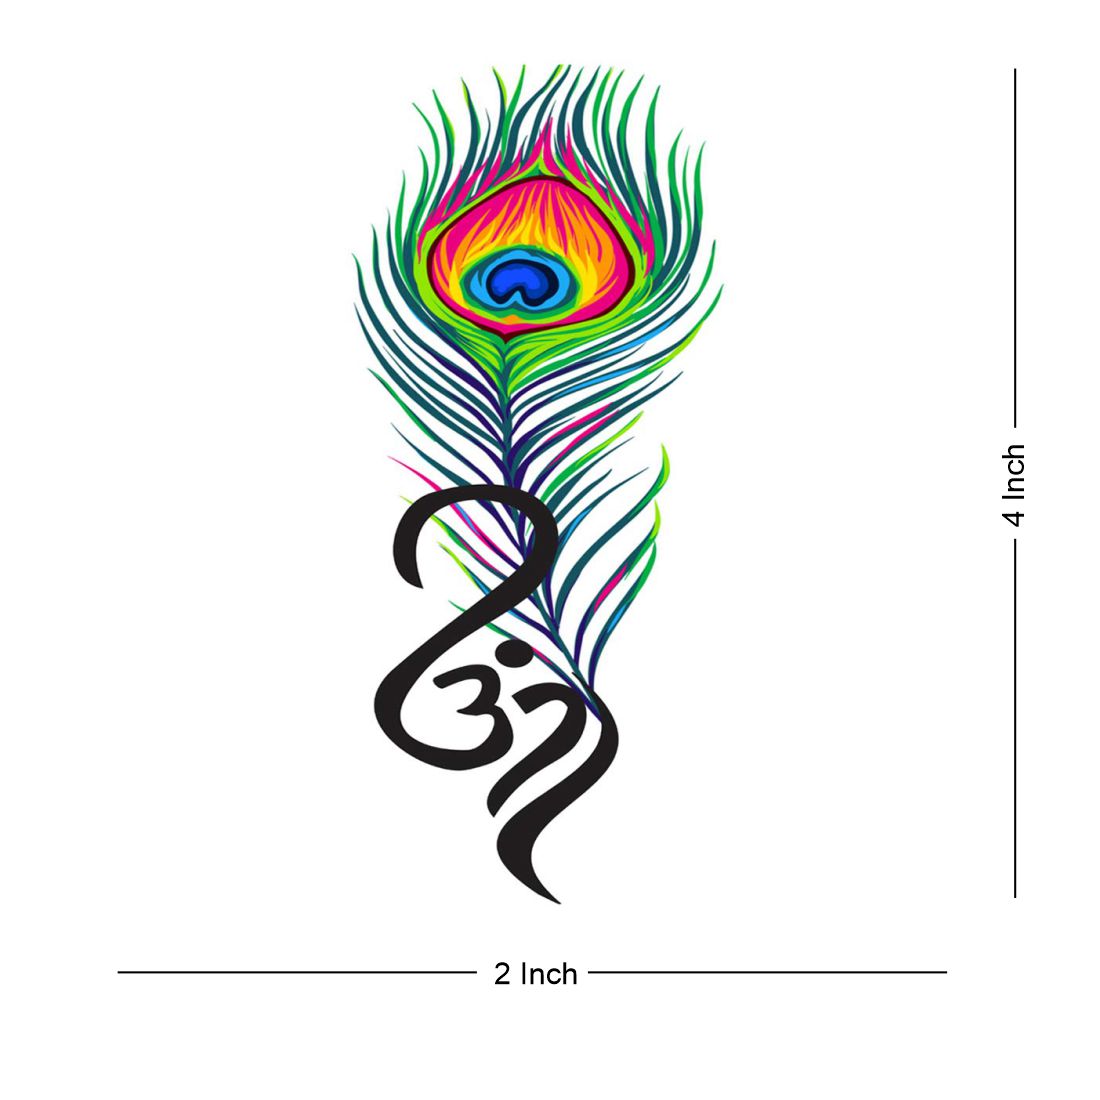 15 Stylish though Spiritual Om Tattoo Designs For Men and Women